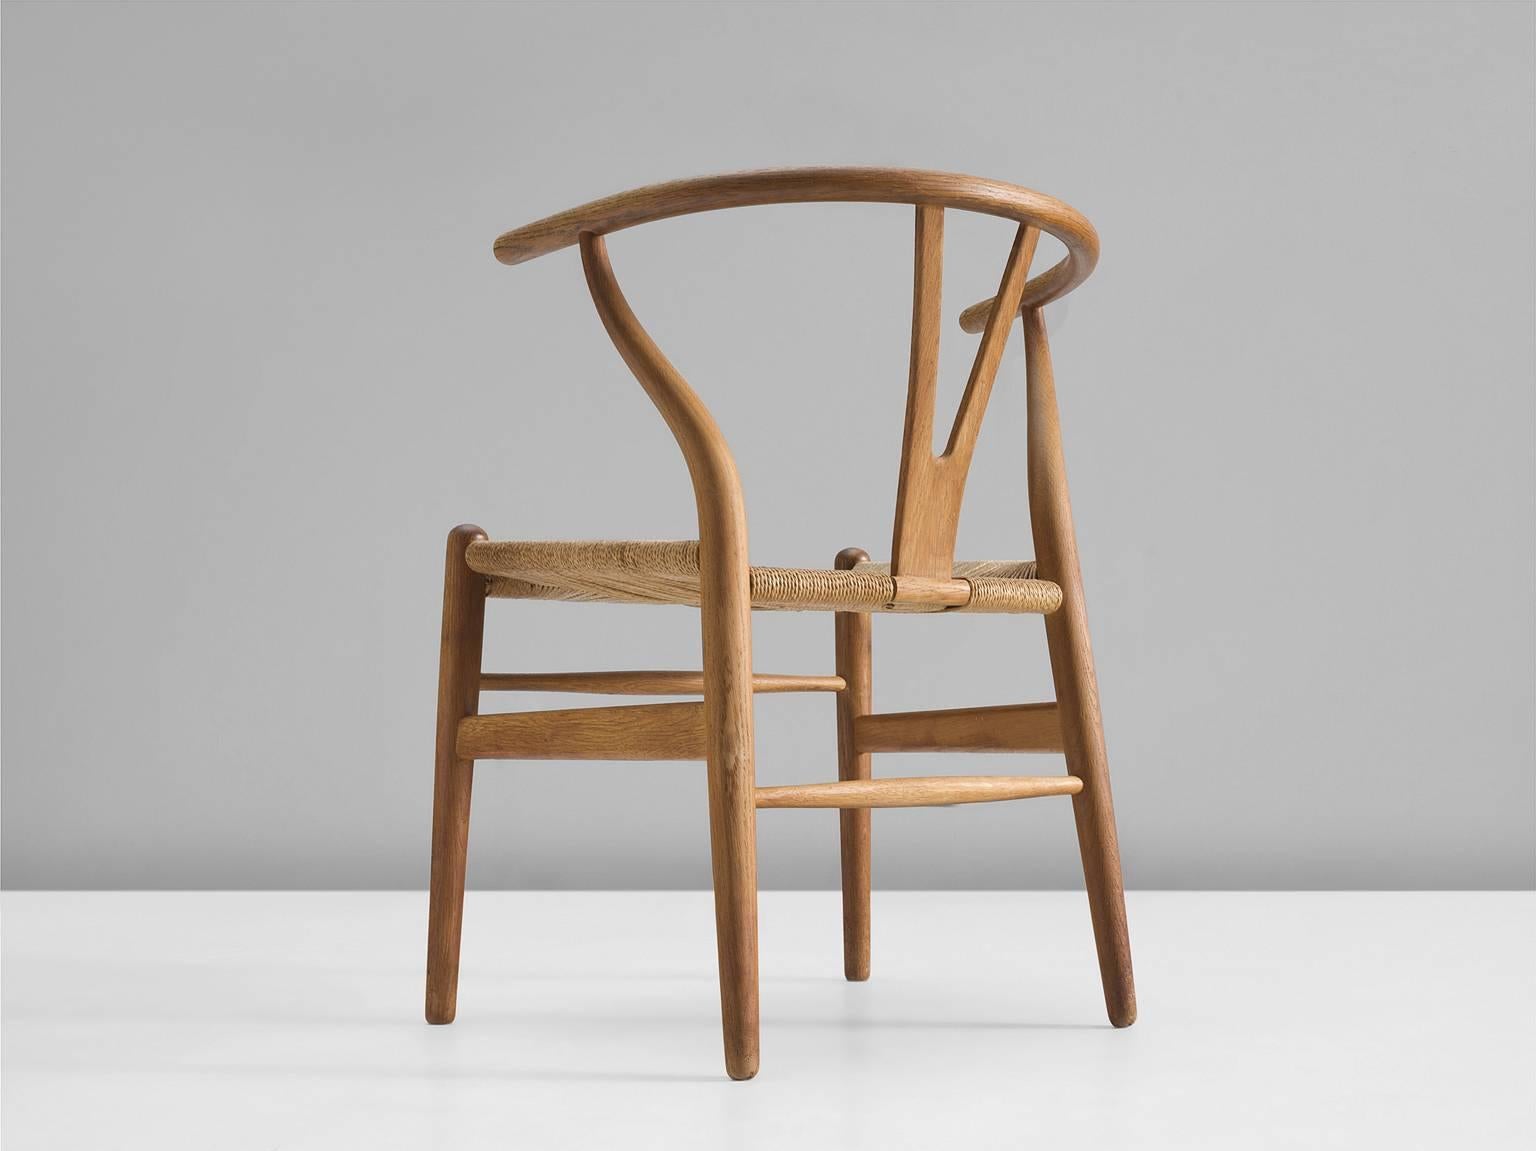 CH24 Y-chair, oak, rope, Denmark.

The Wishbone chair, officially named CH24 is designed by Hans J. Wegner (1914-2007) in 1949 and produced since 1950 by Carl Hansen. At first, the chair was not that popular. Only a few furniture dealers were